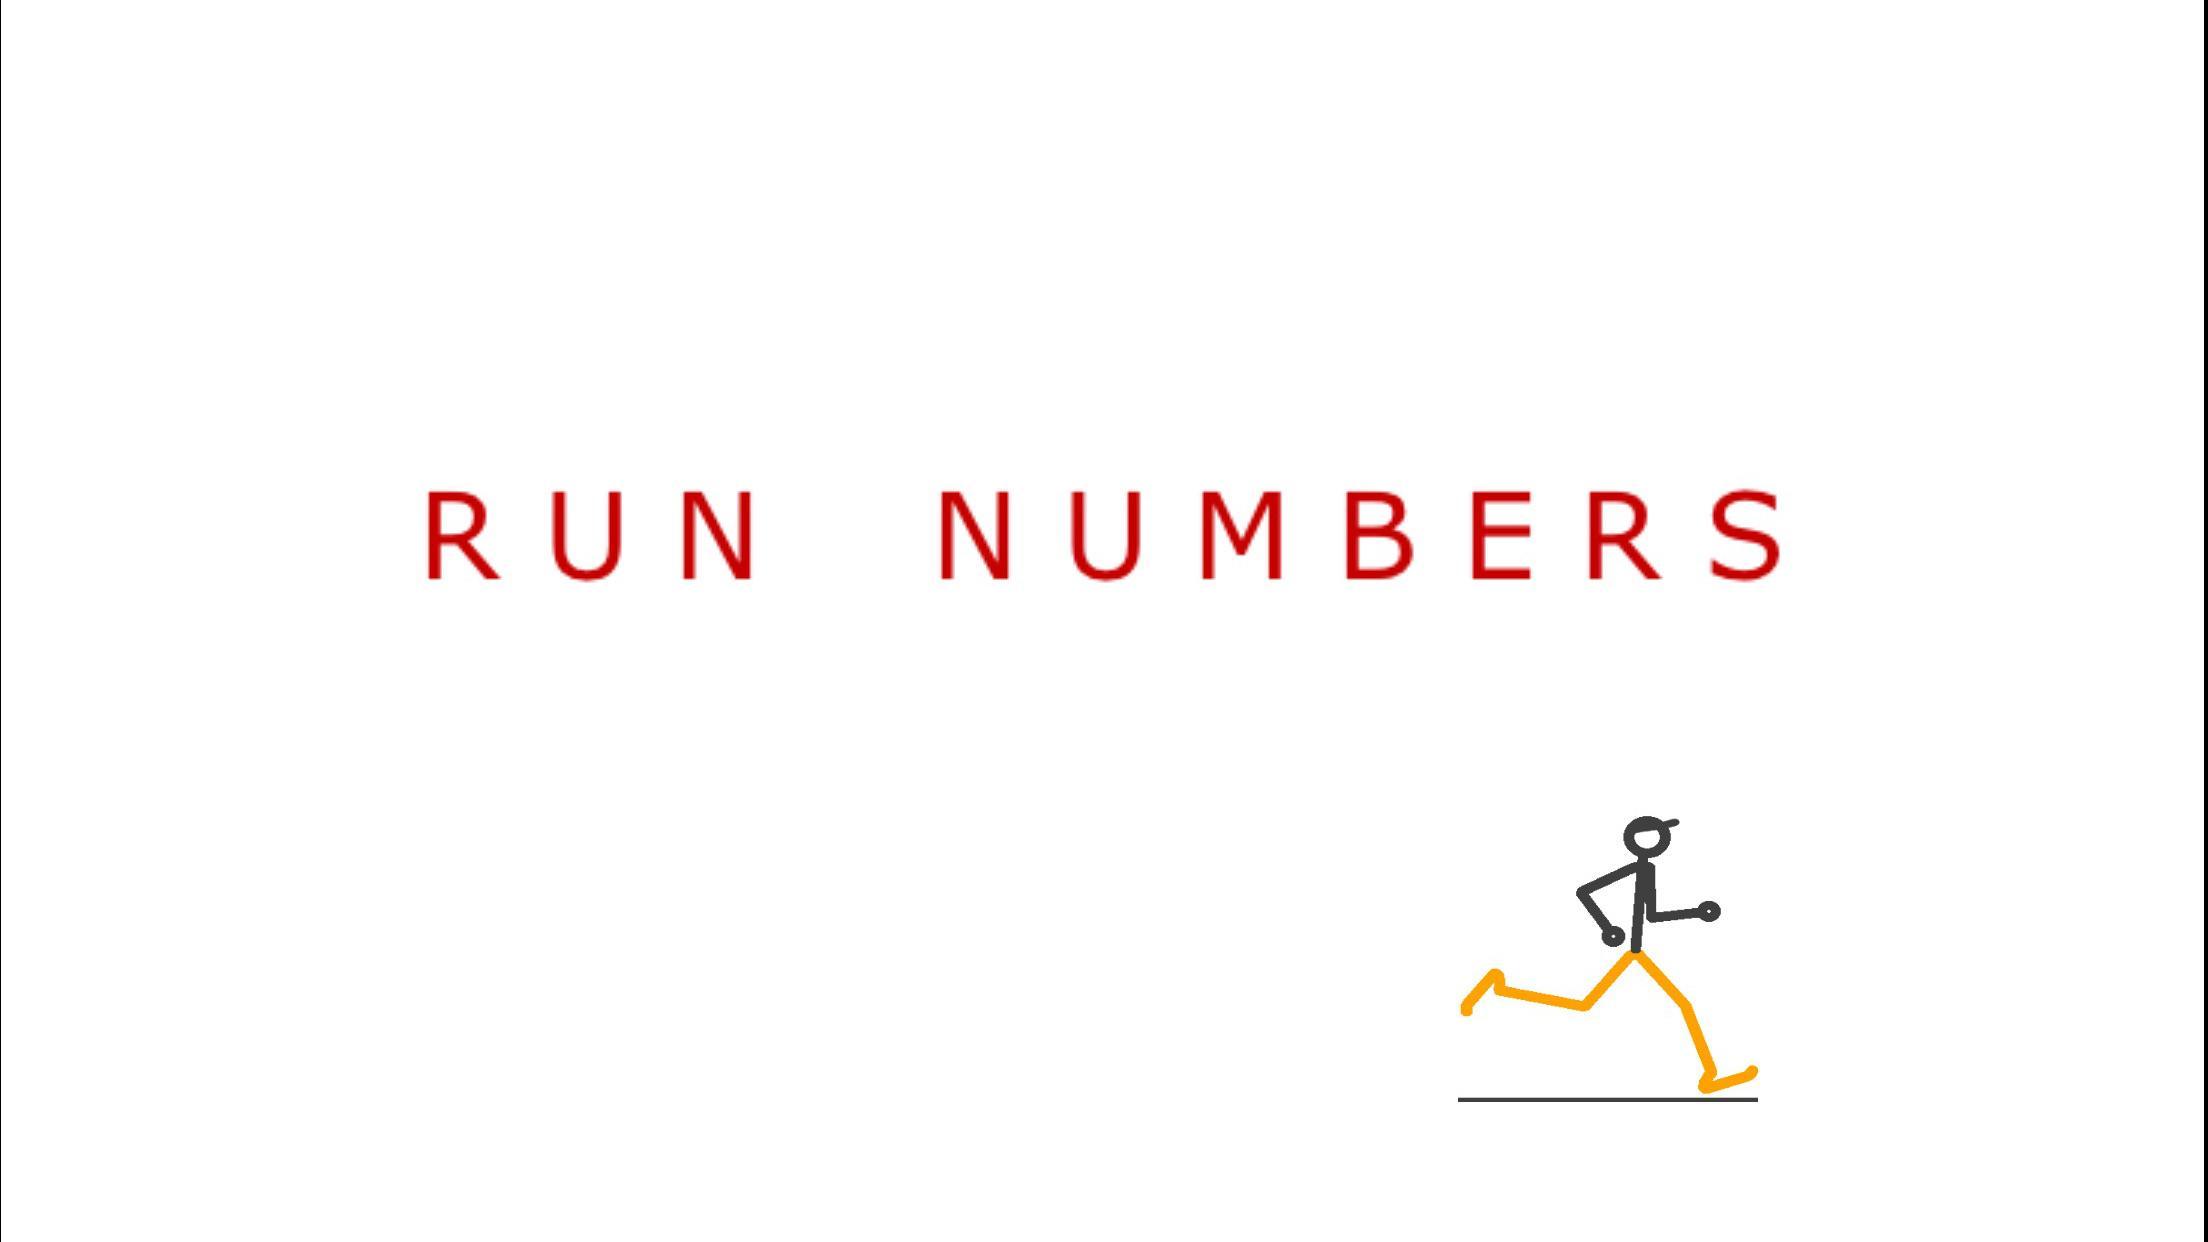 Run the numbers